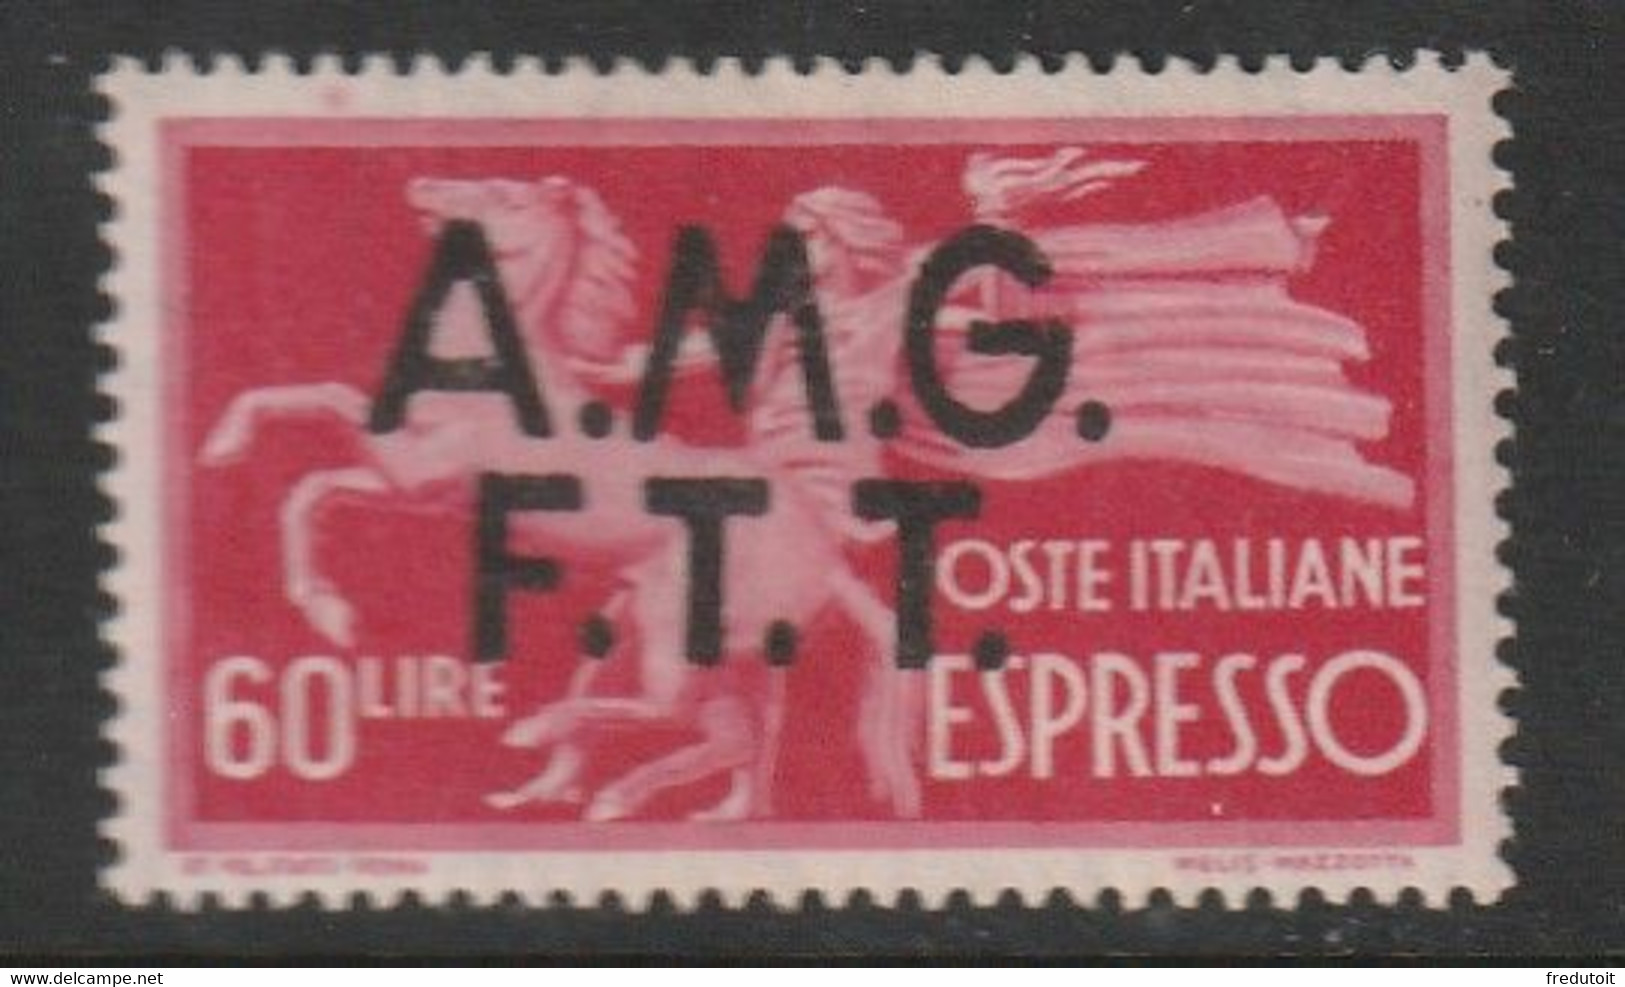 TRIESTE - Zone A - Timbre Expres N°4 * (1947-48) - Exprespost